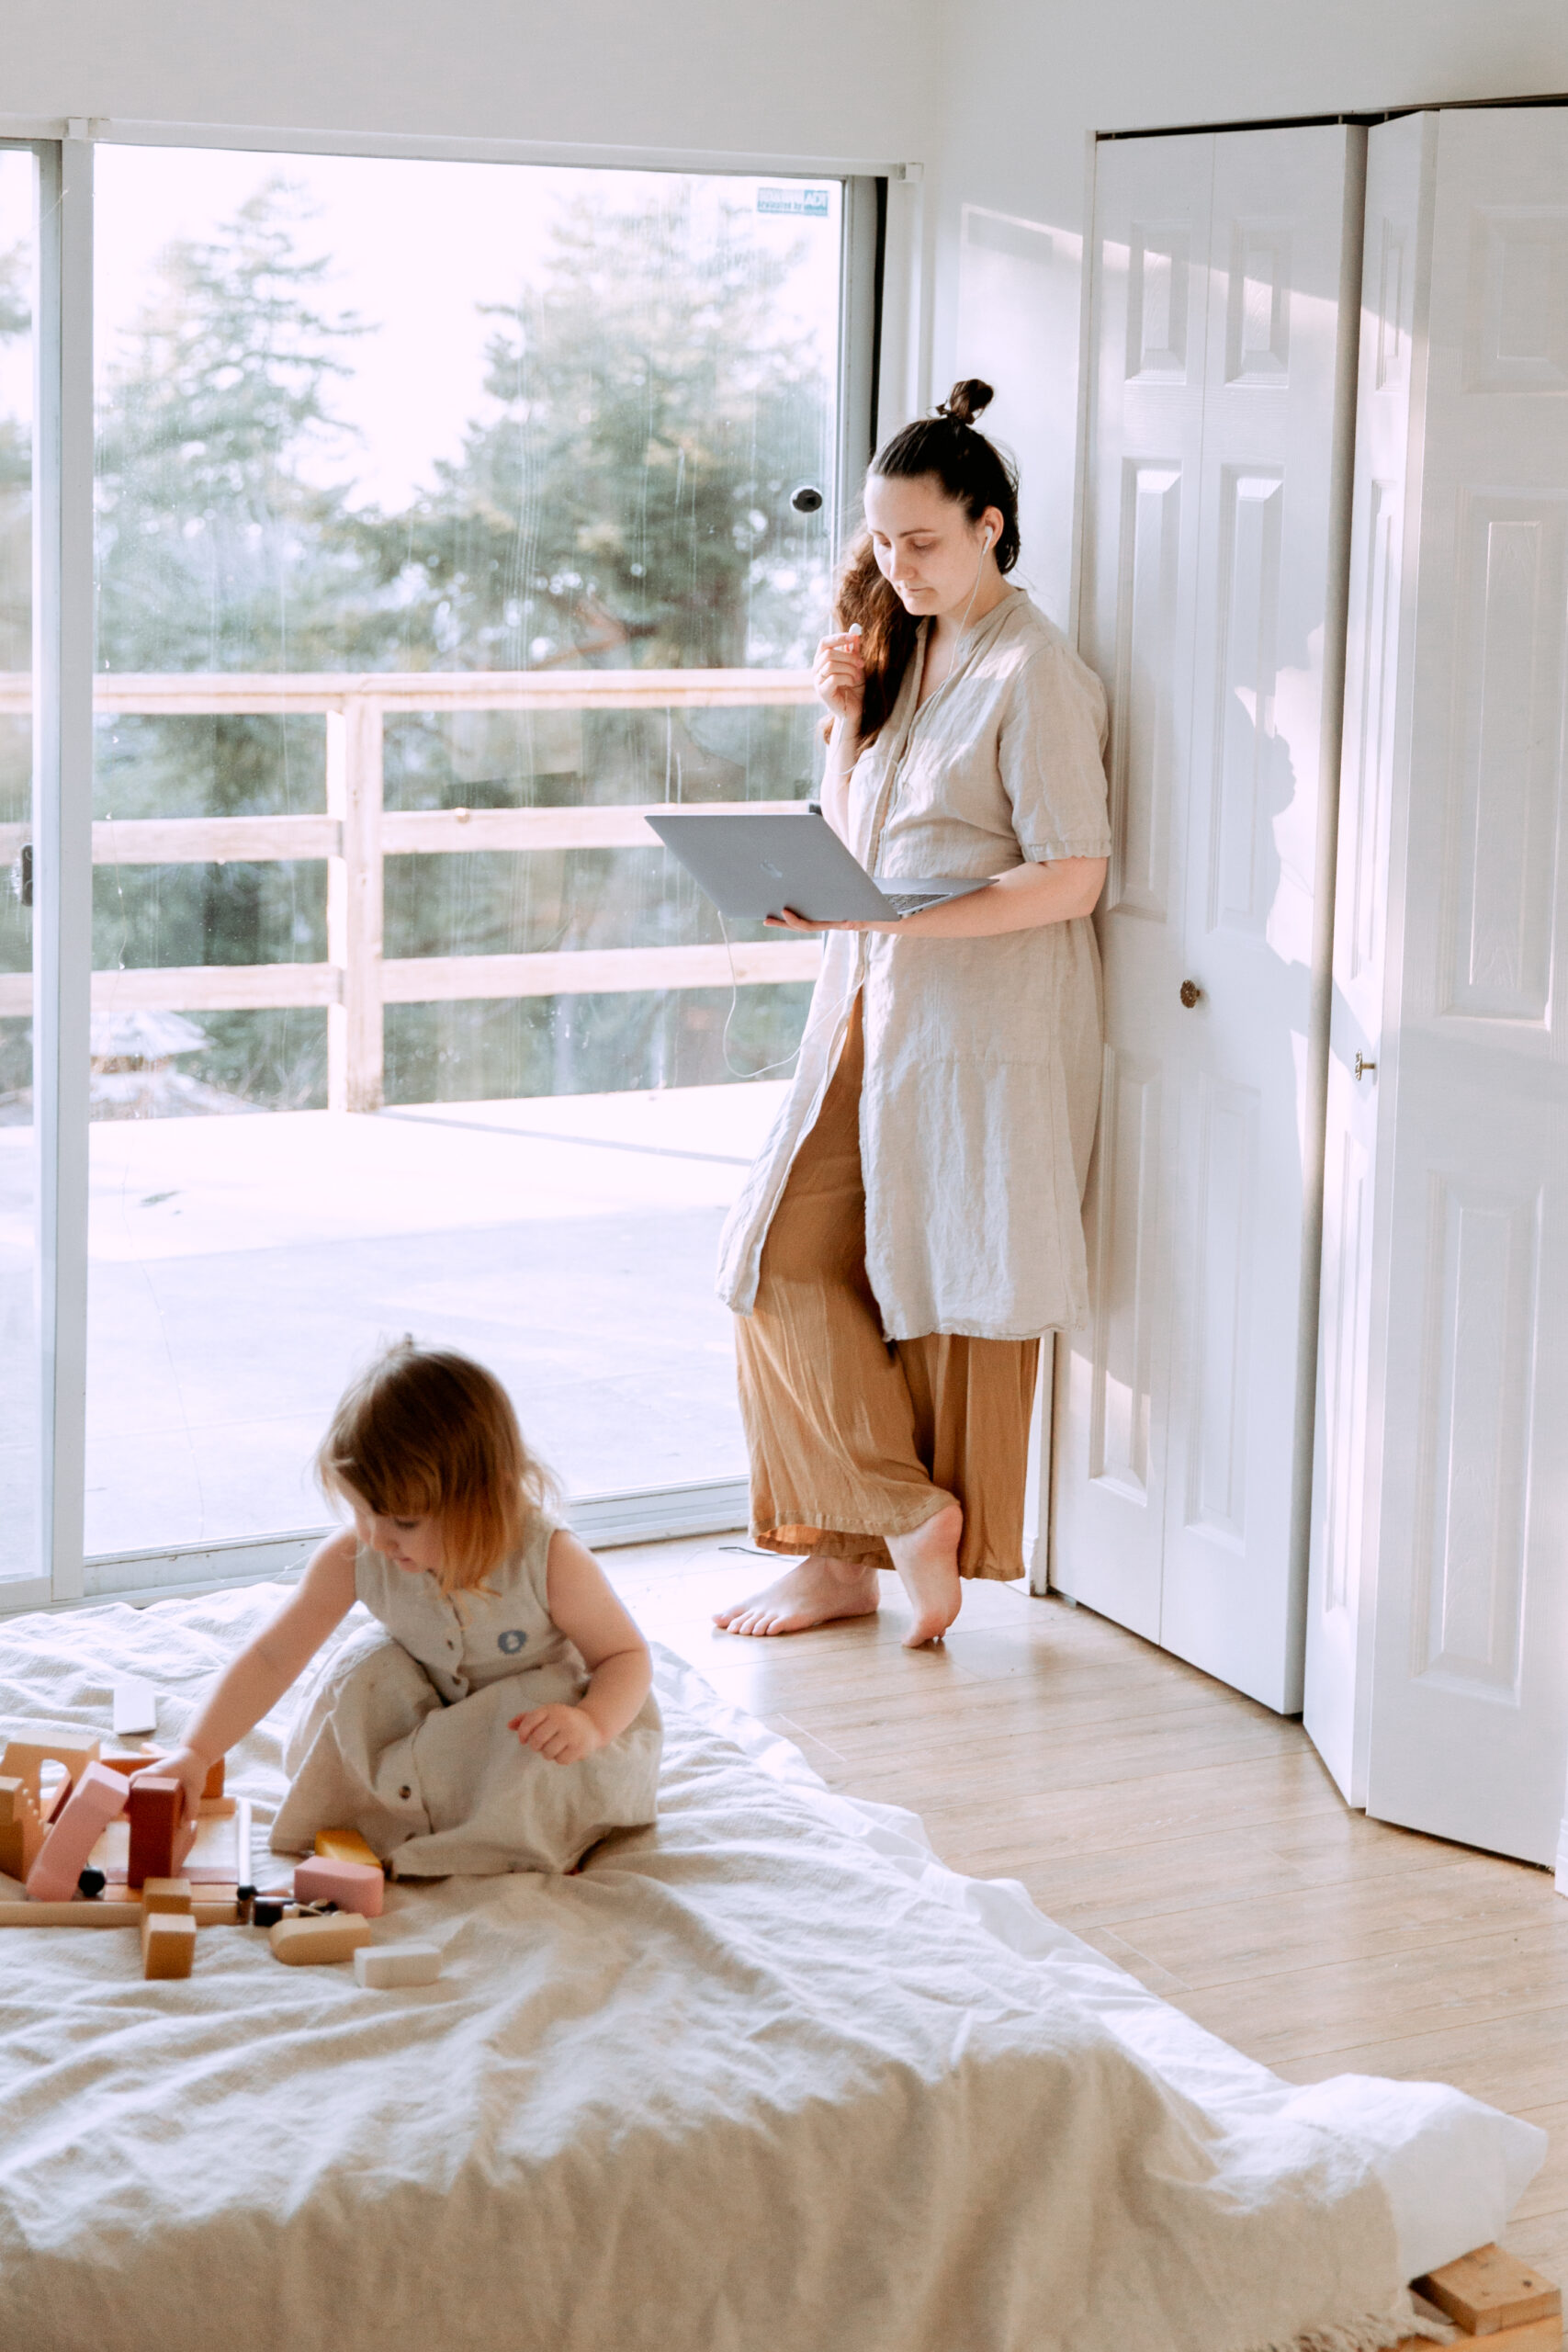 4 Ways Employers Can Support Working Moms